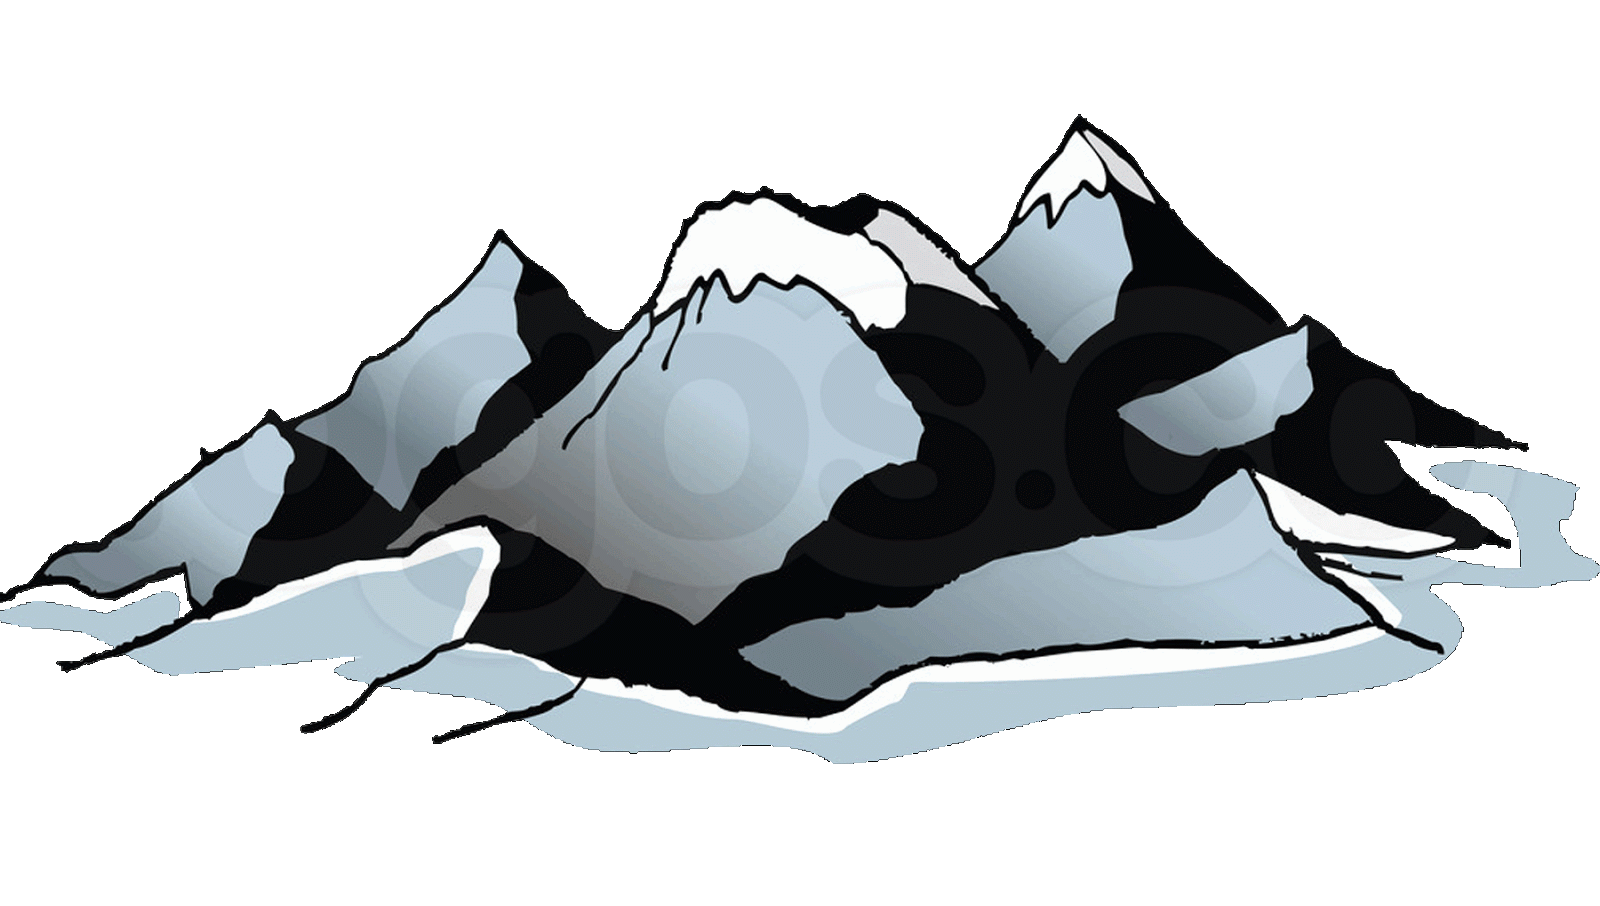 Glacier at getdrawings com. Mountain clipart river